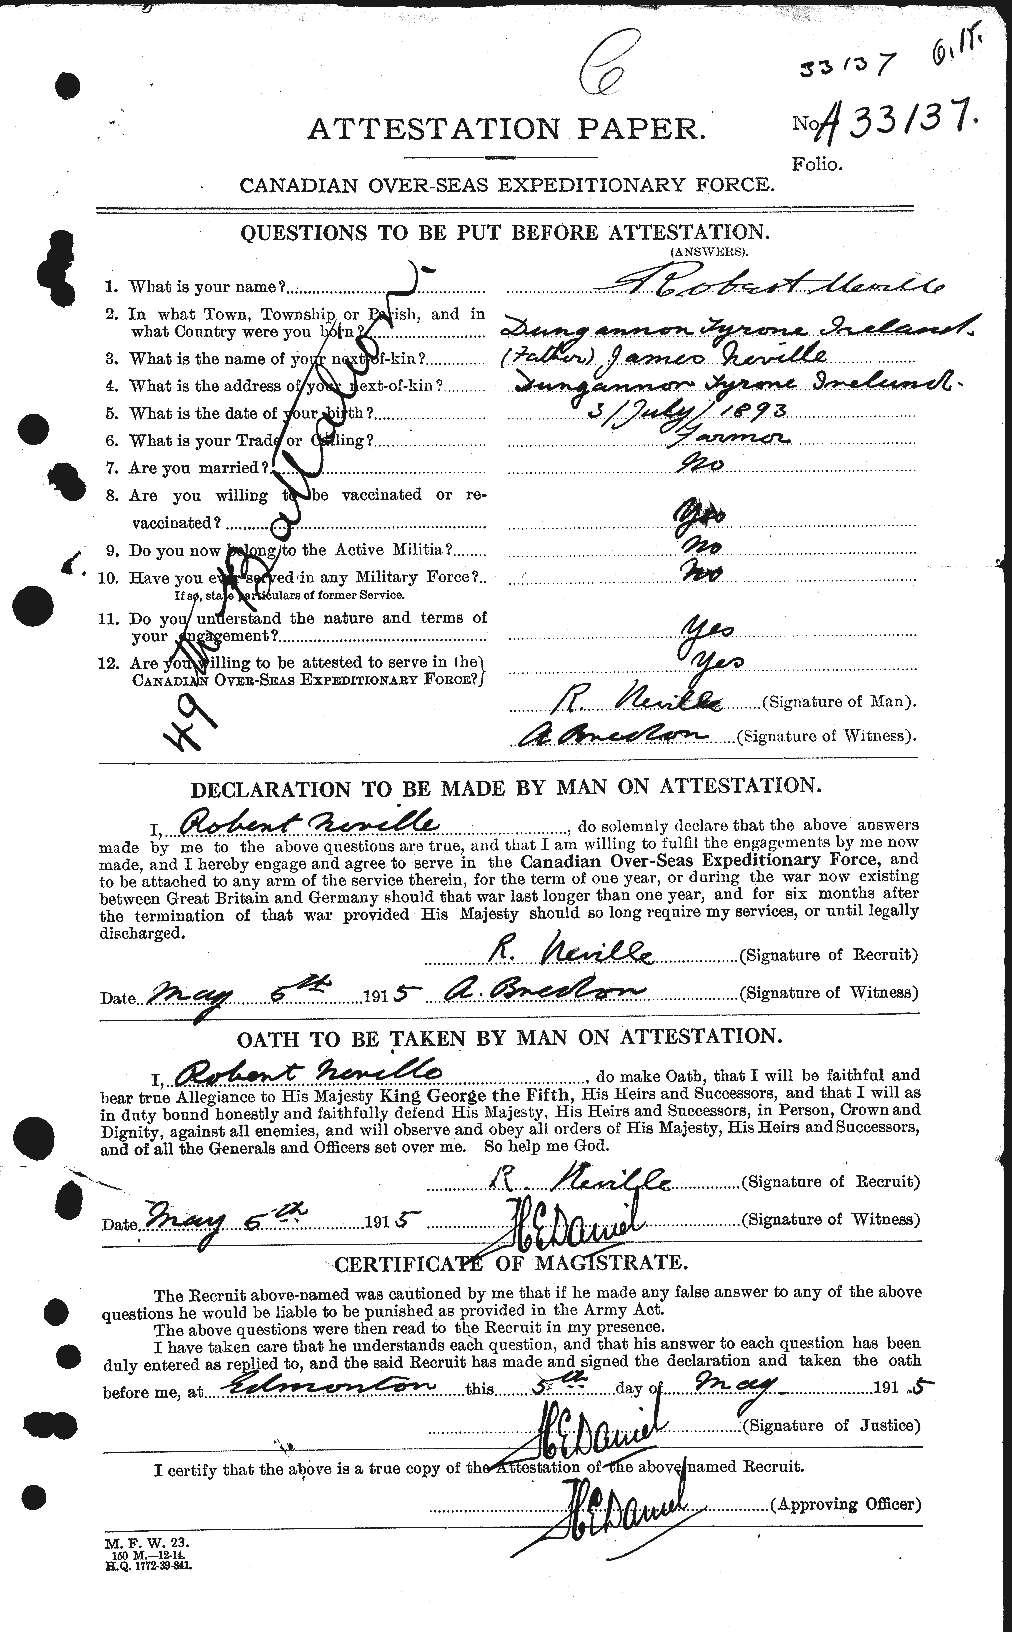 Personnel Records of the First World War - CEF 550404a